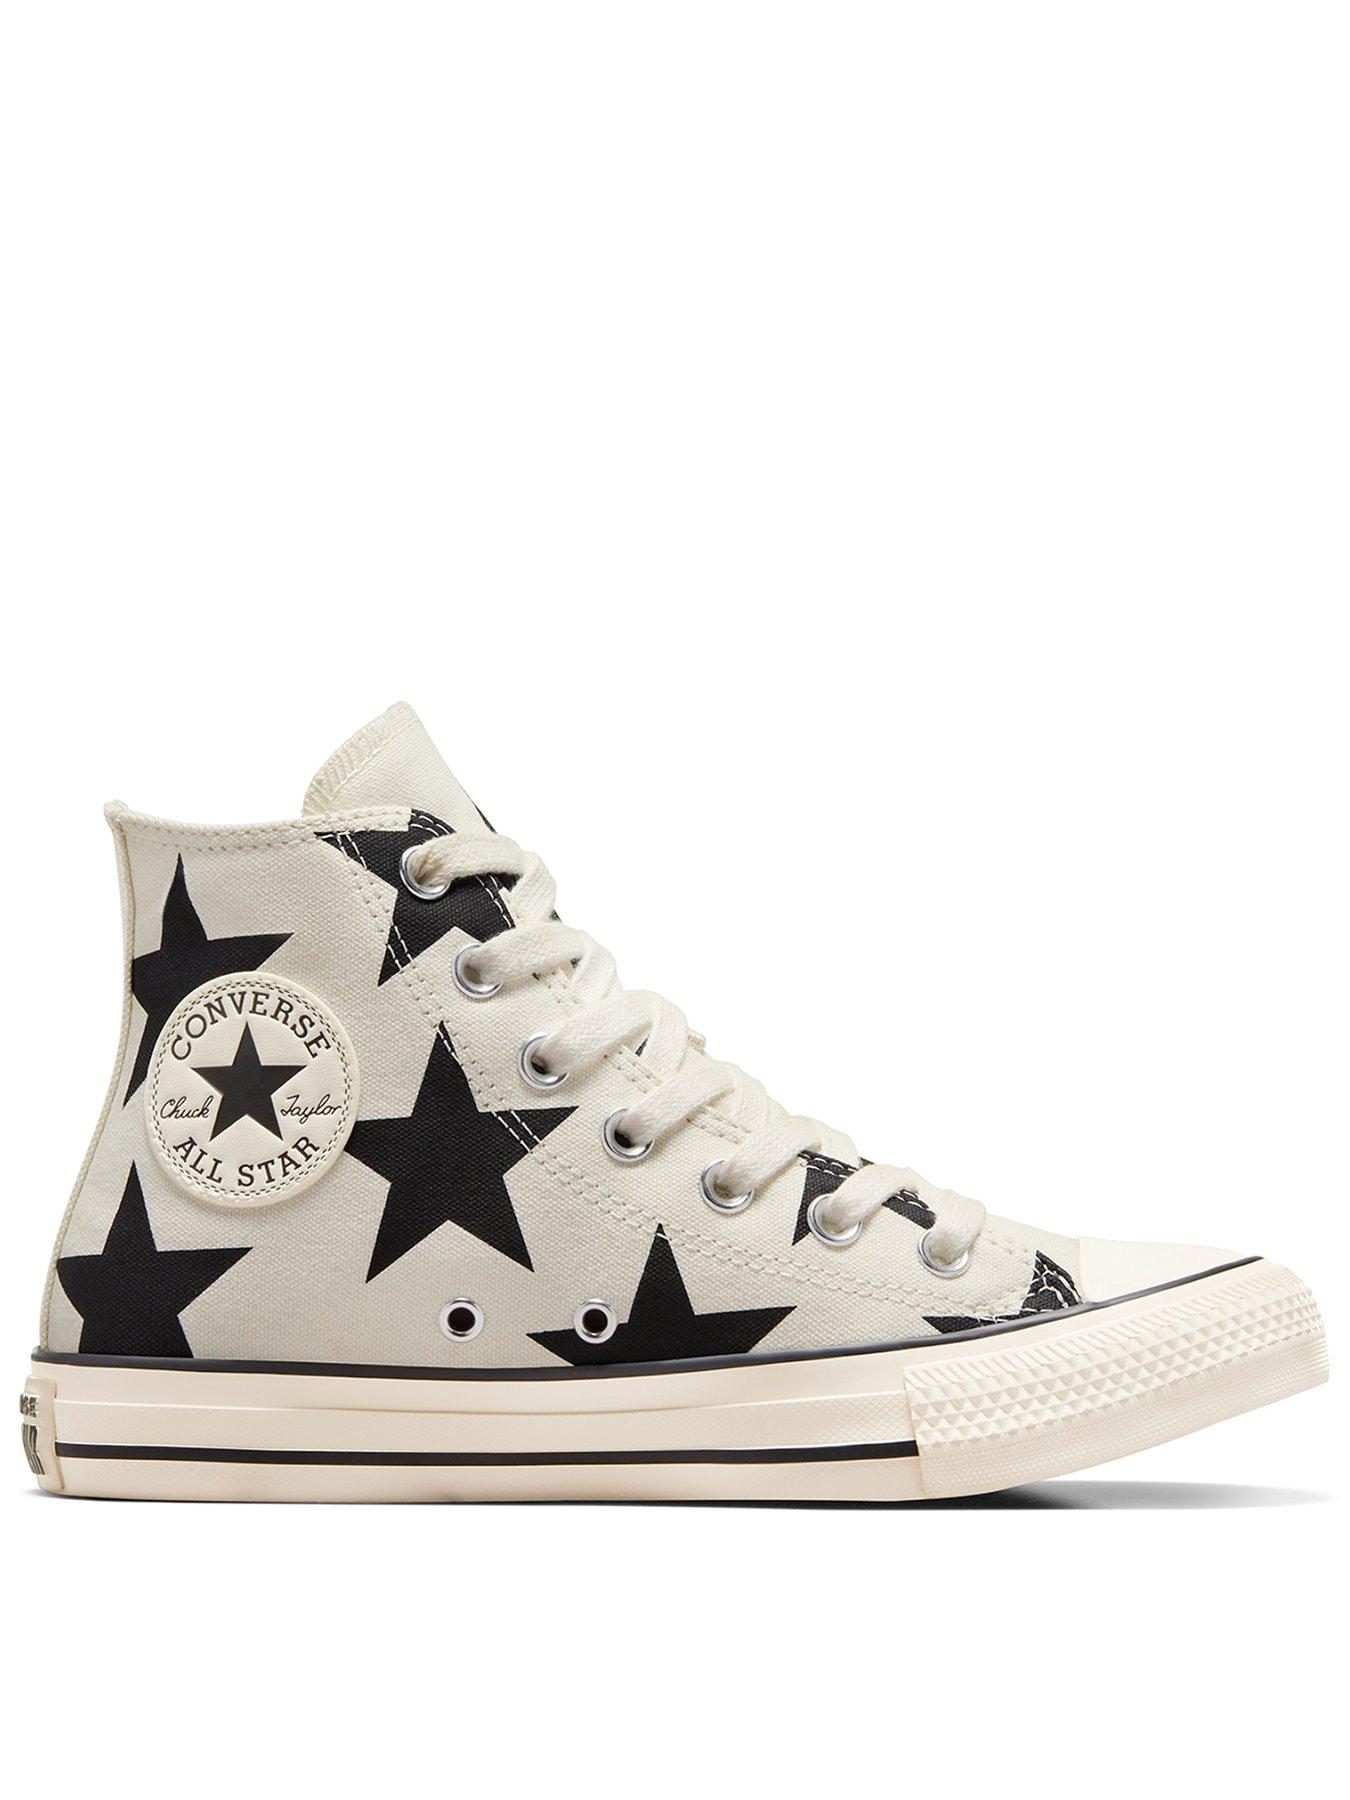 Converse All Star Platform Clean Leather High Top Womens White - Converse